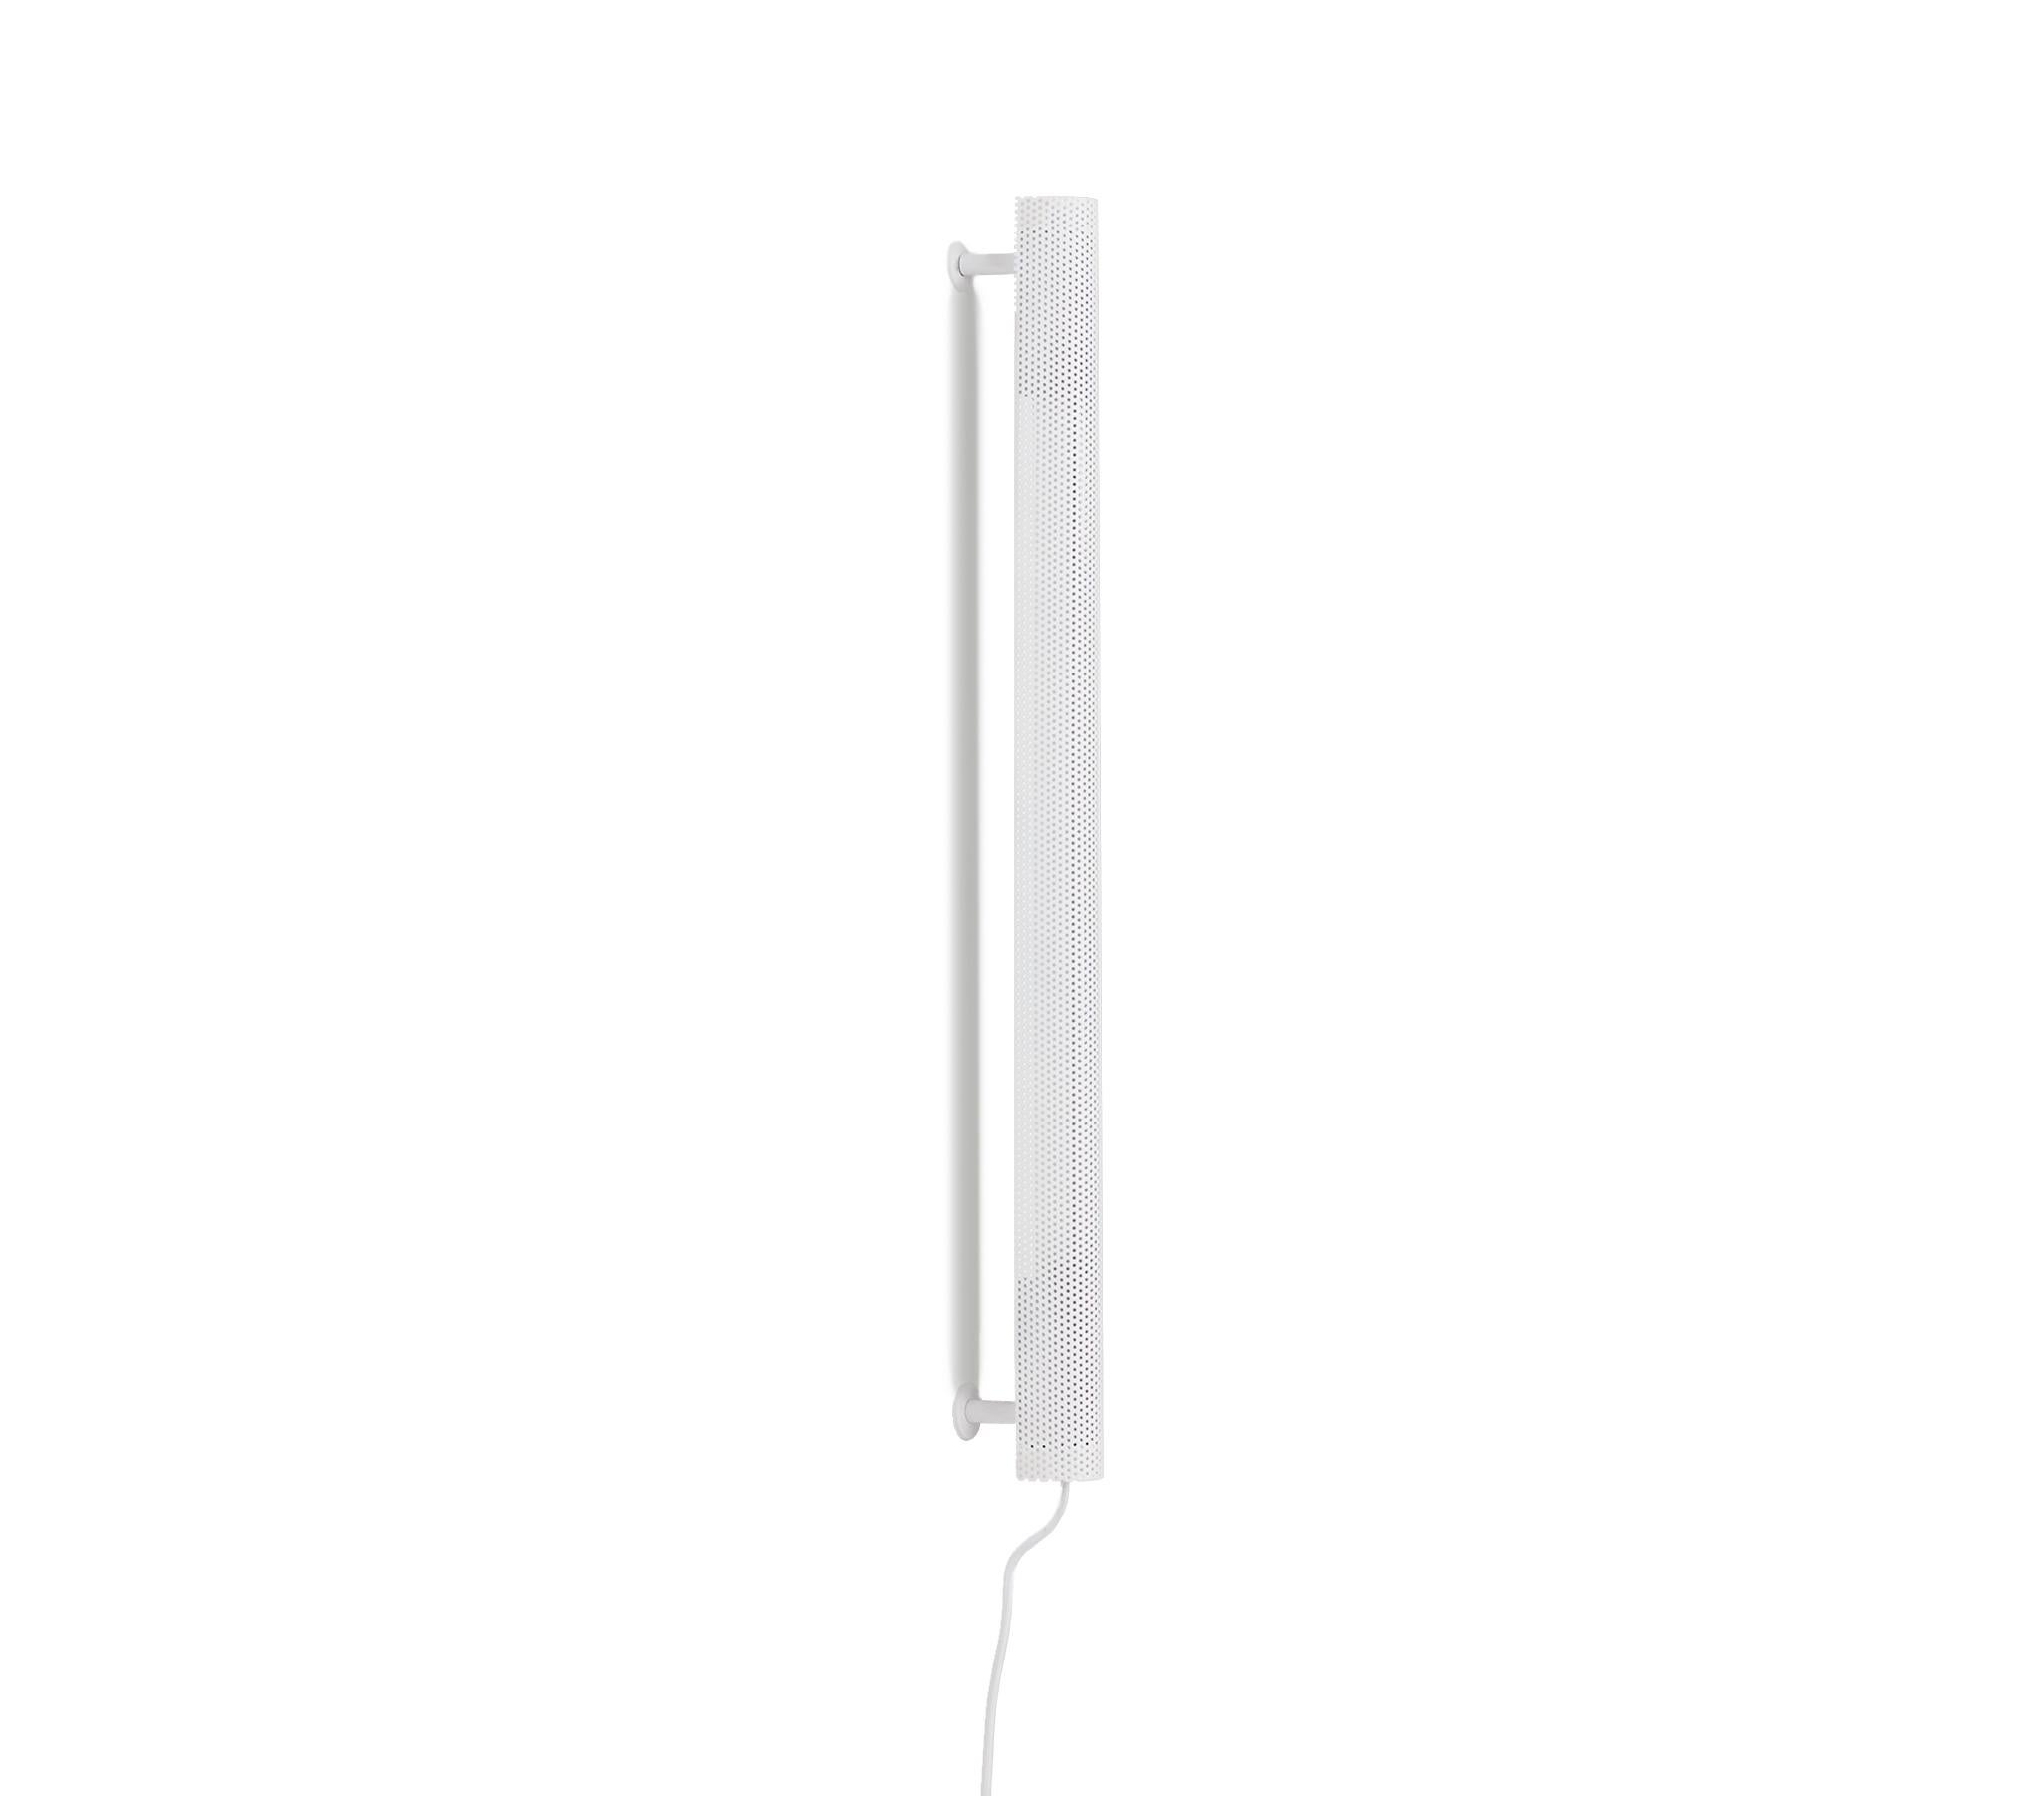 Radent wall lamp is based on a standard LED light and is a slim radiant linear wall lamp. The Radent Wall Lamp is available in two sizes with a black, white or brass finish. Measyre: 700 mm.